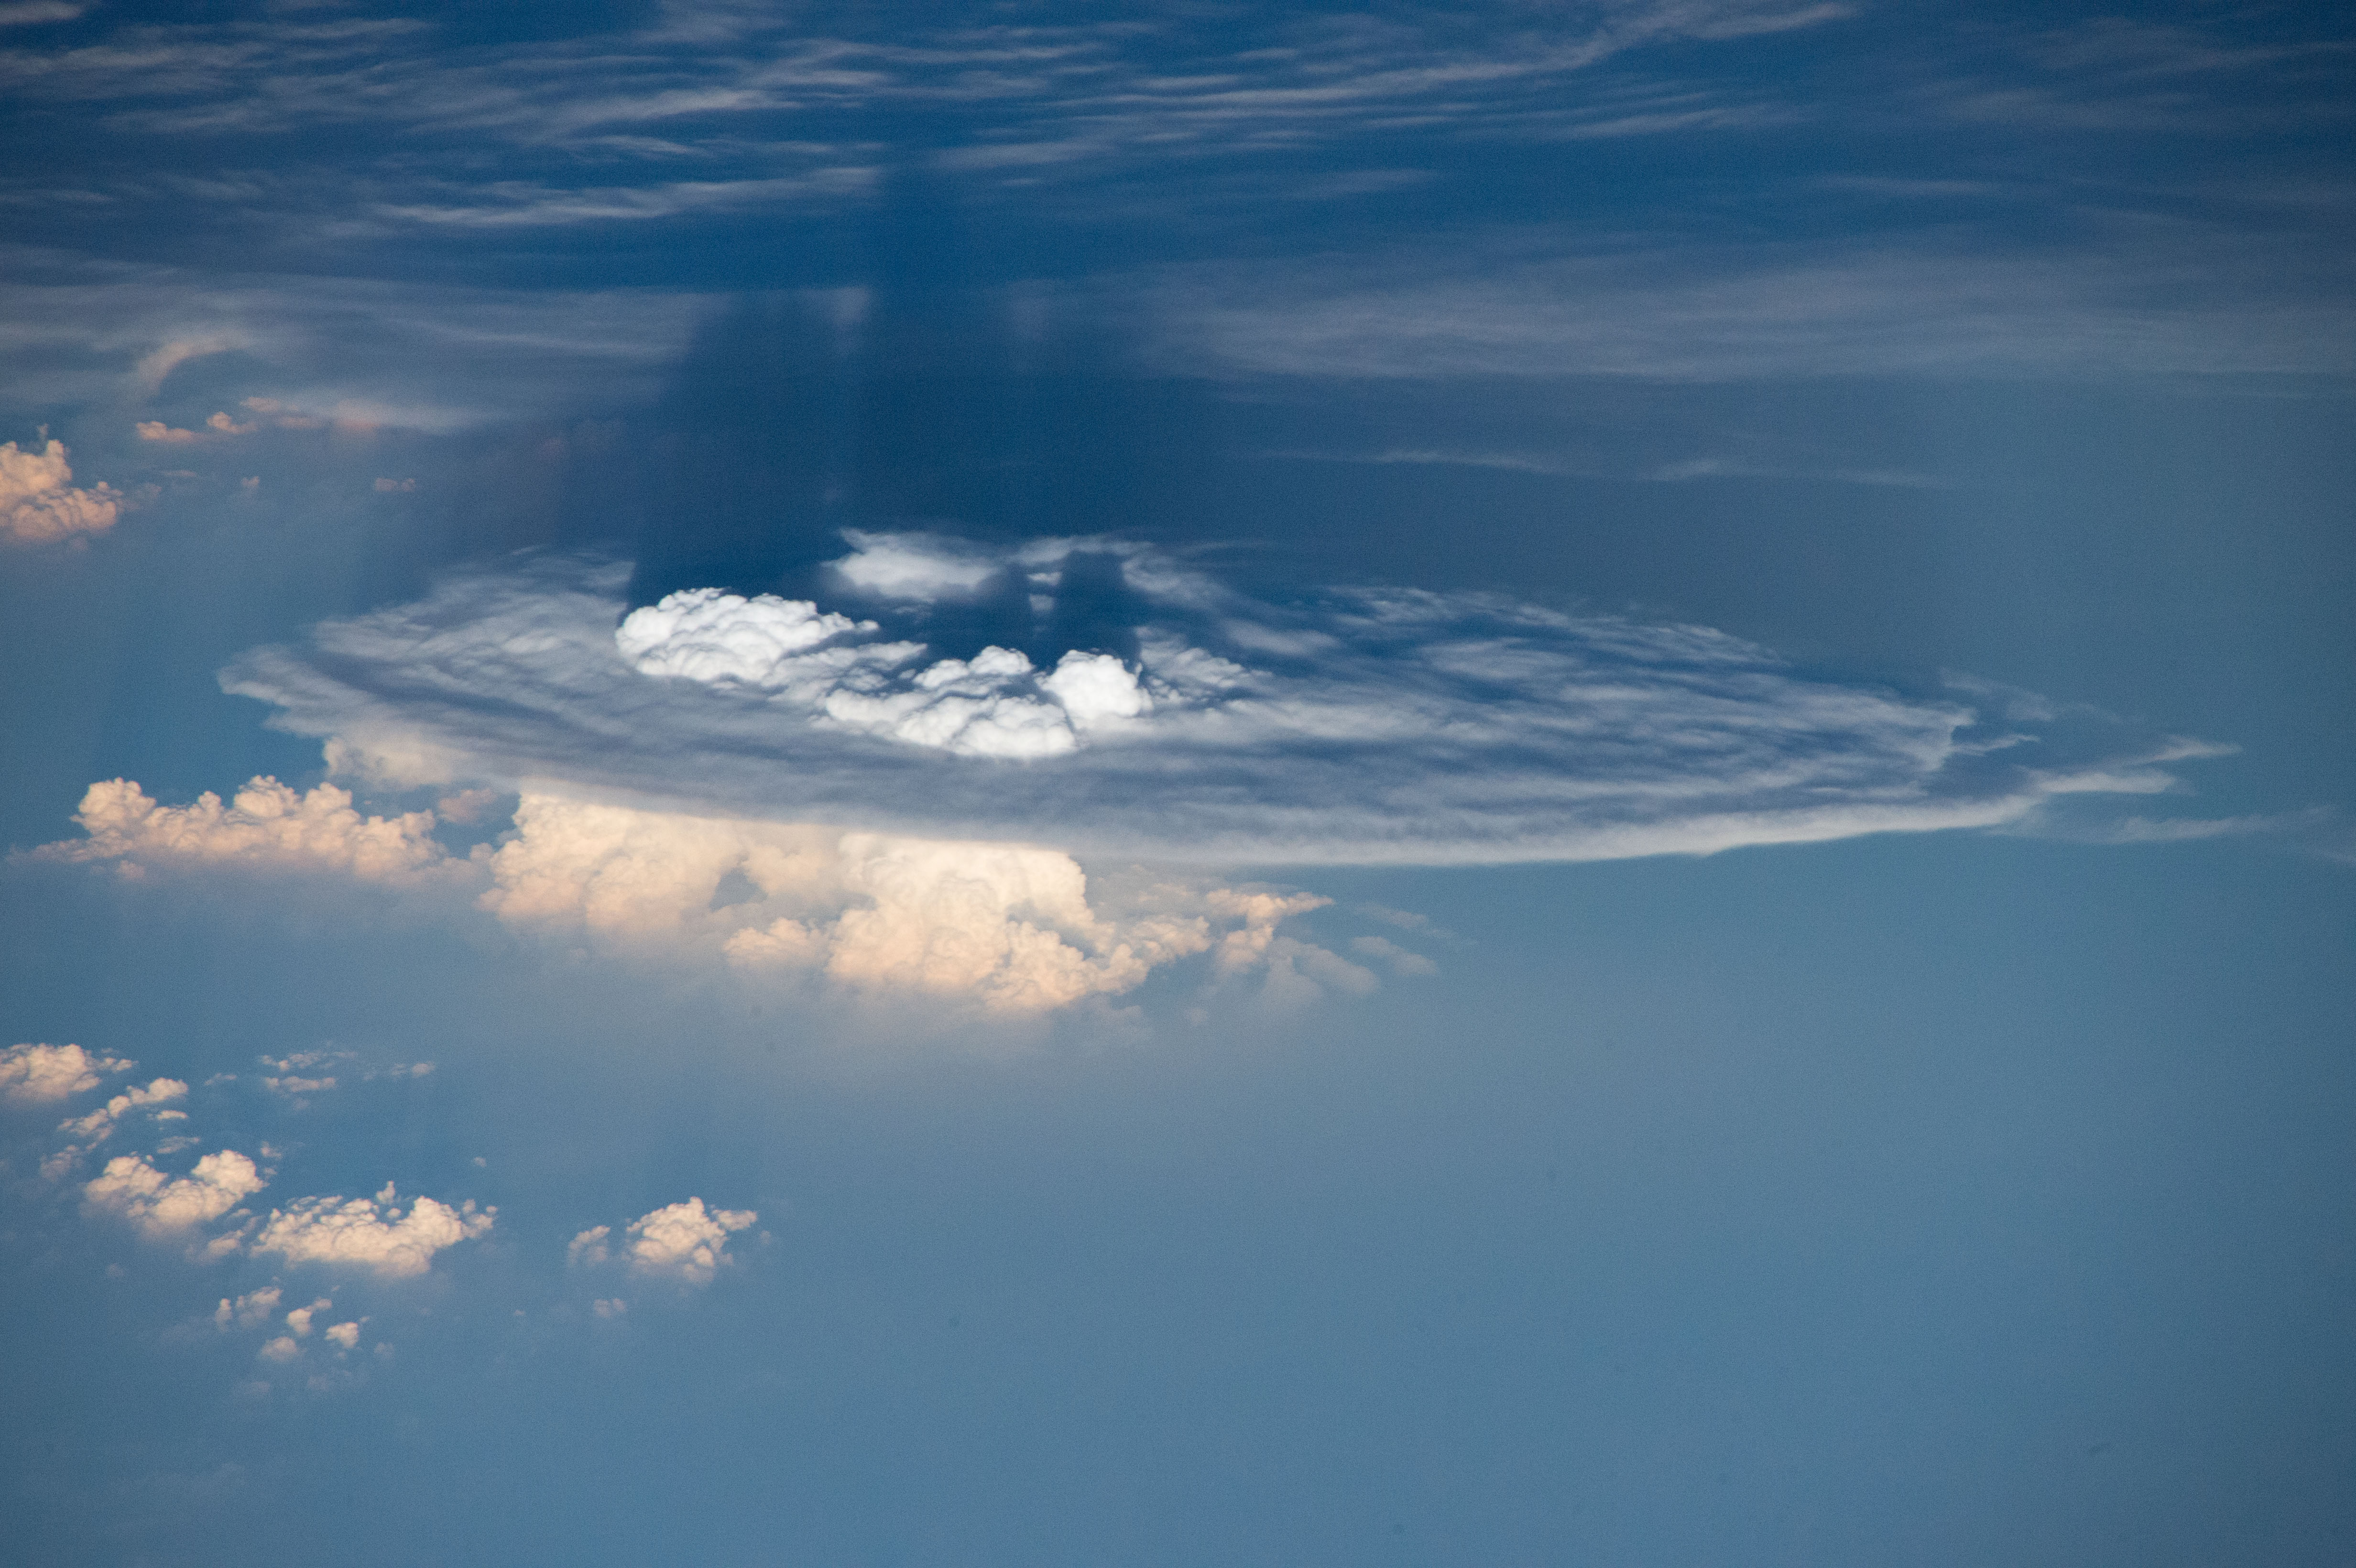 A thunderstorm blowing its top, as seen from space - ImaGeo